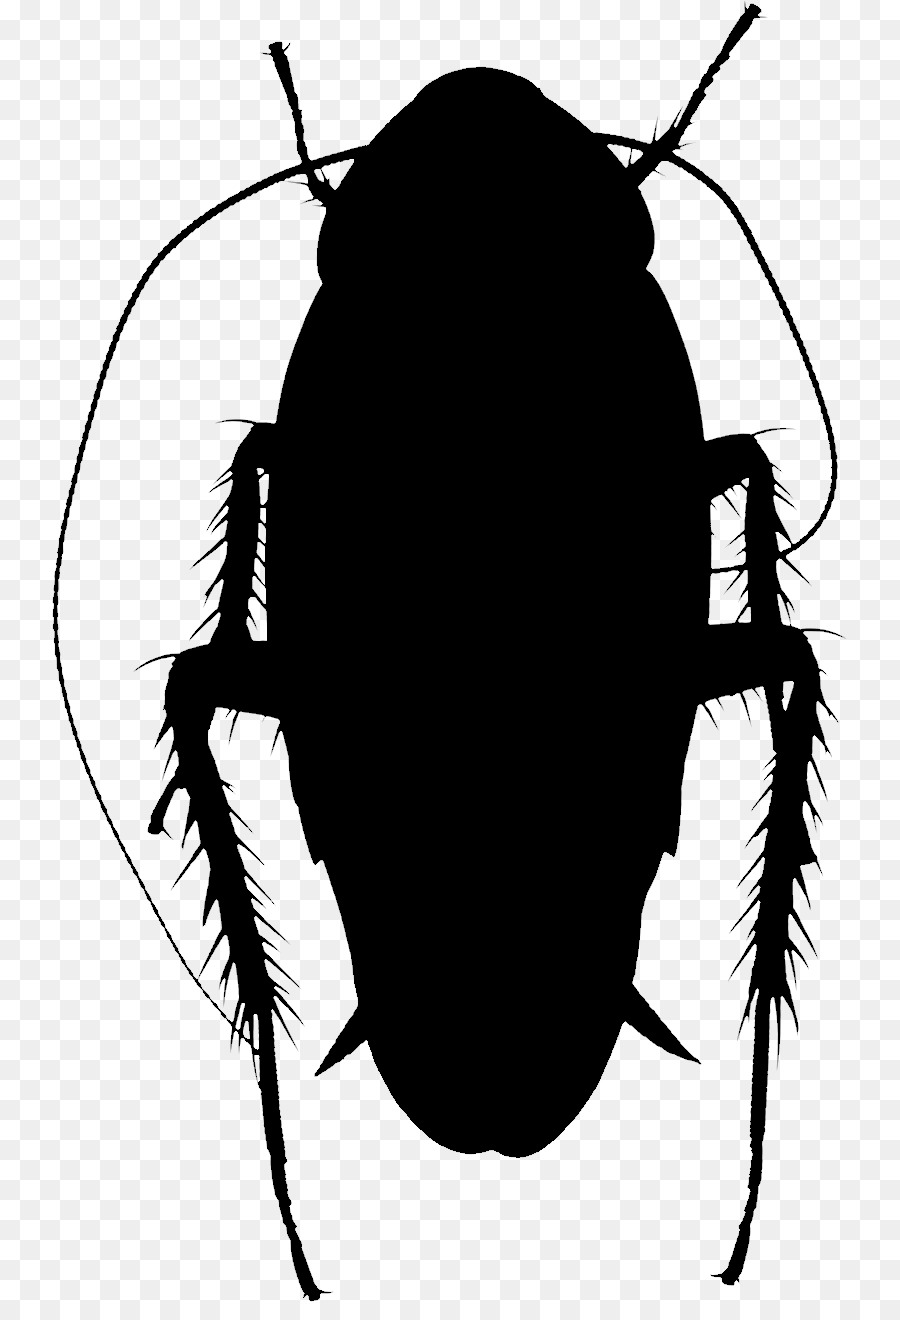 Clip art Silhouette Insect Membrane -  png download - 795*1302 - Free Transparent Silhouette png Download.